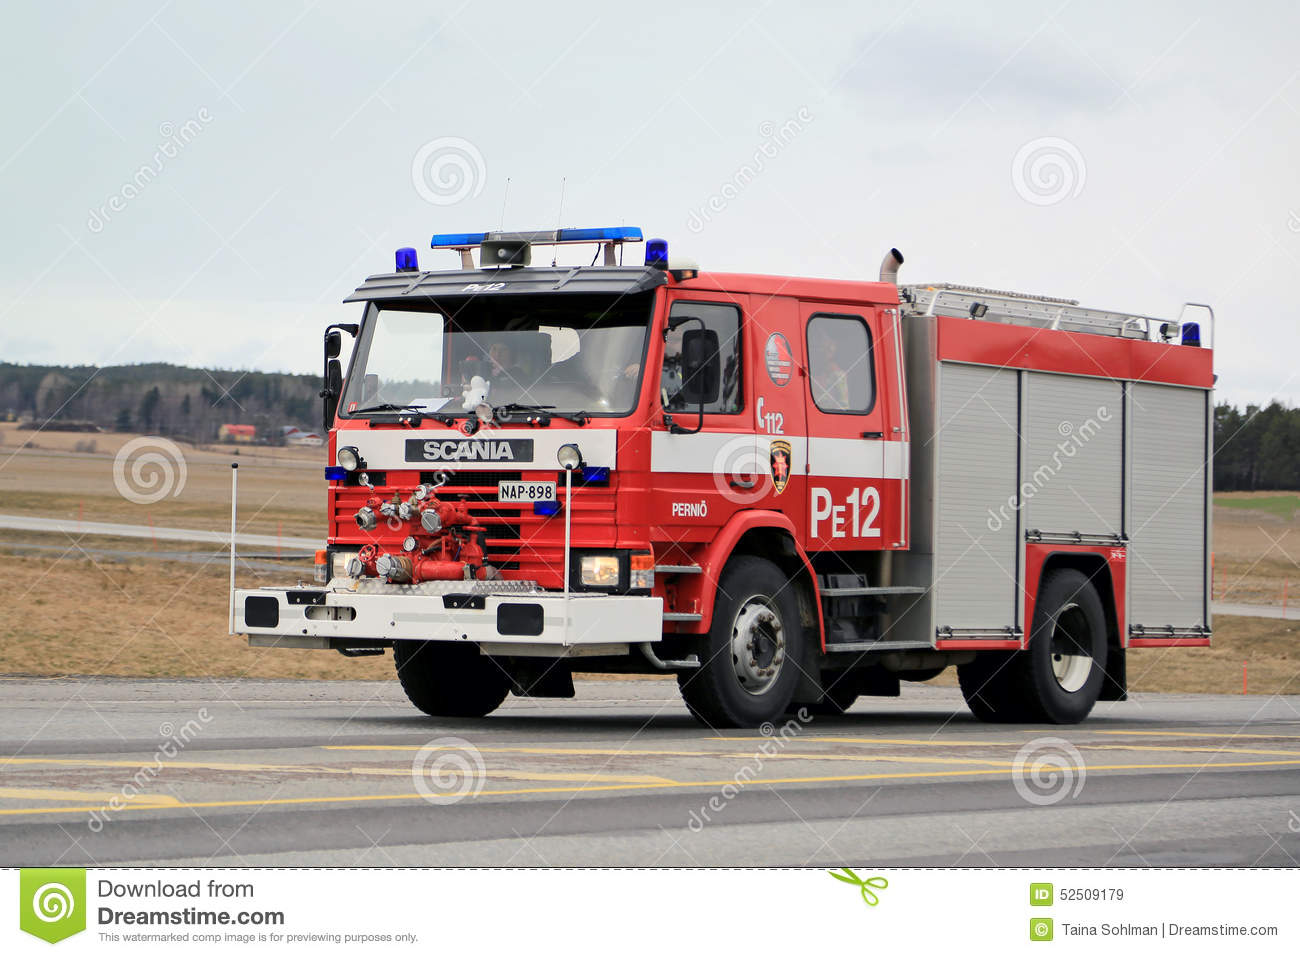 Scania Fire Truck Wallpapers Vehicles Hq Scania Fire Truck